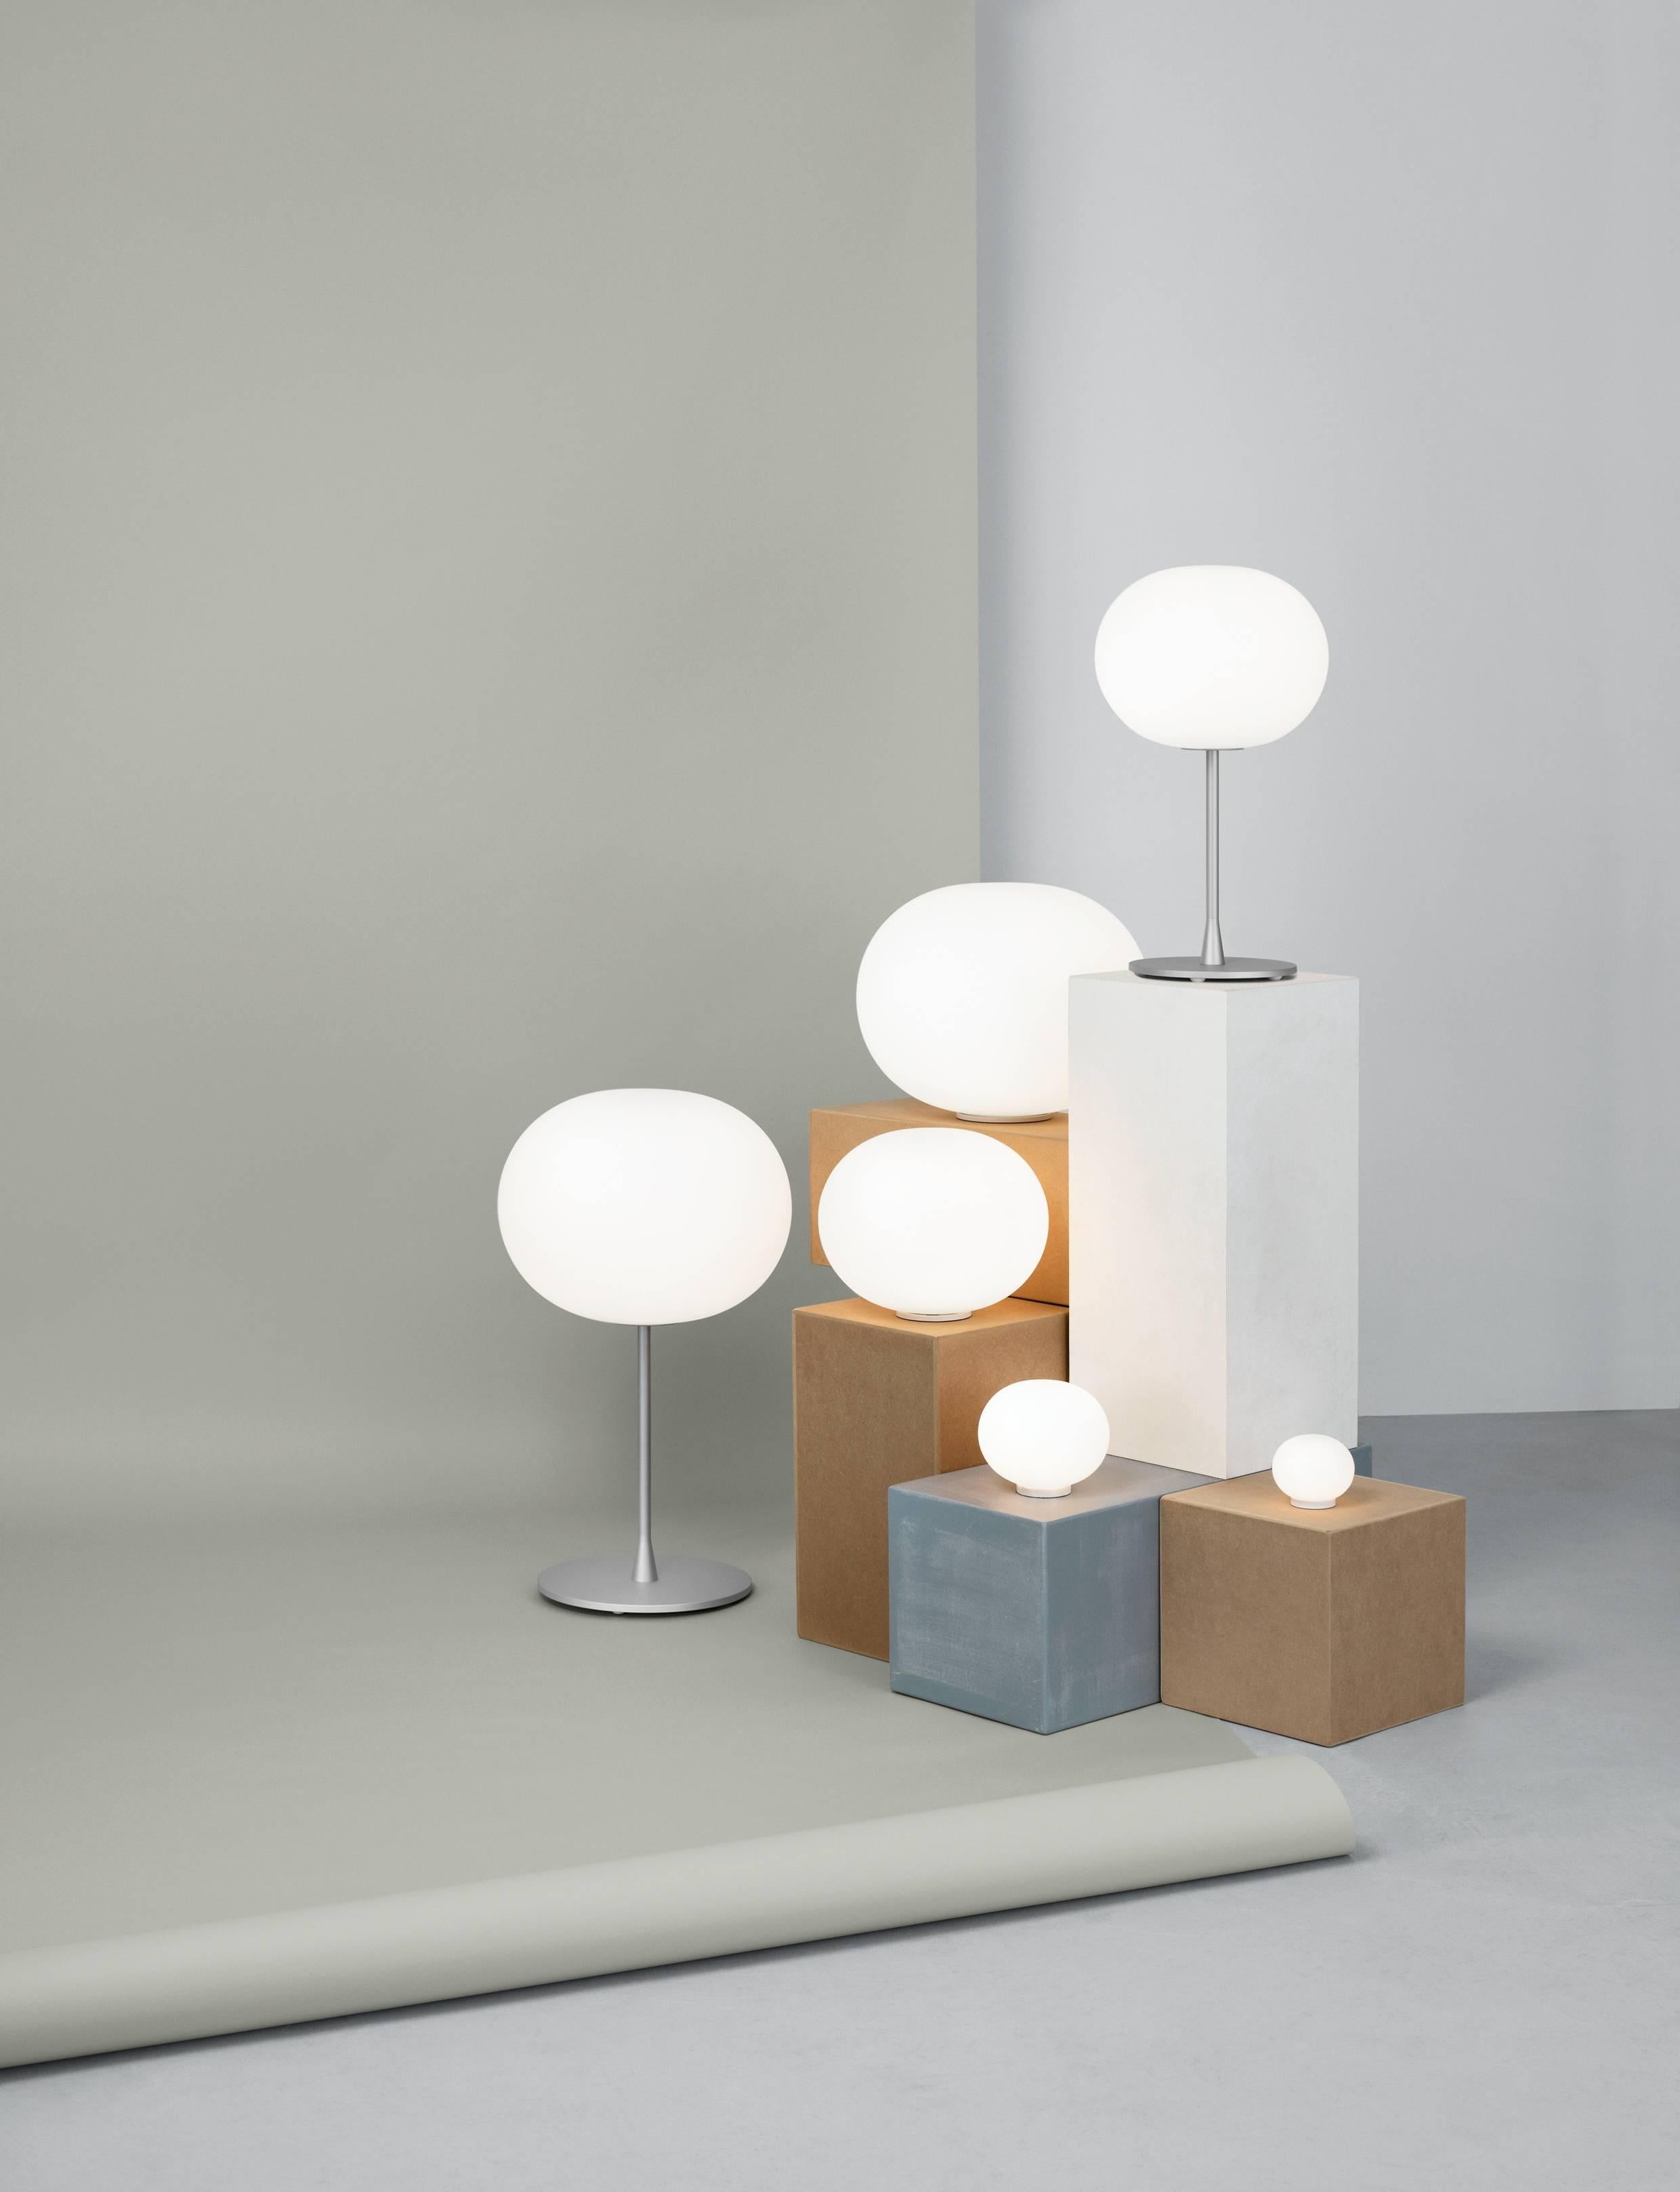 Flos Glo-Ball T1 Halogen Table Lamp by Jasper Morrison
Part of the popular Glo Ball Series, the Glo Ball Basic was created in 1998 by artist Jasper Morrison to invoke the radiant calm of a full moon. This unique table lamp has a white acid-etched